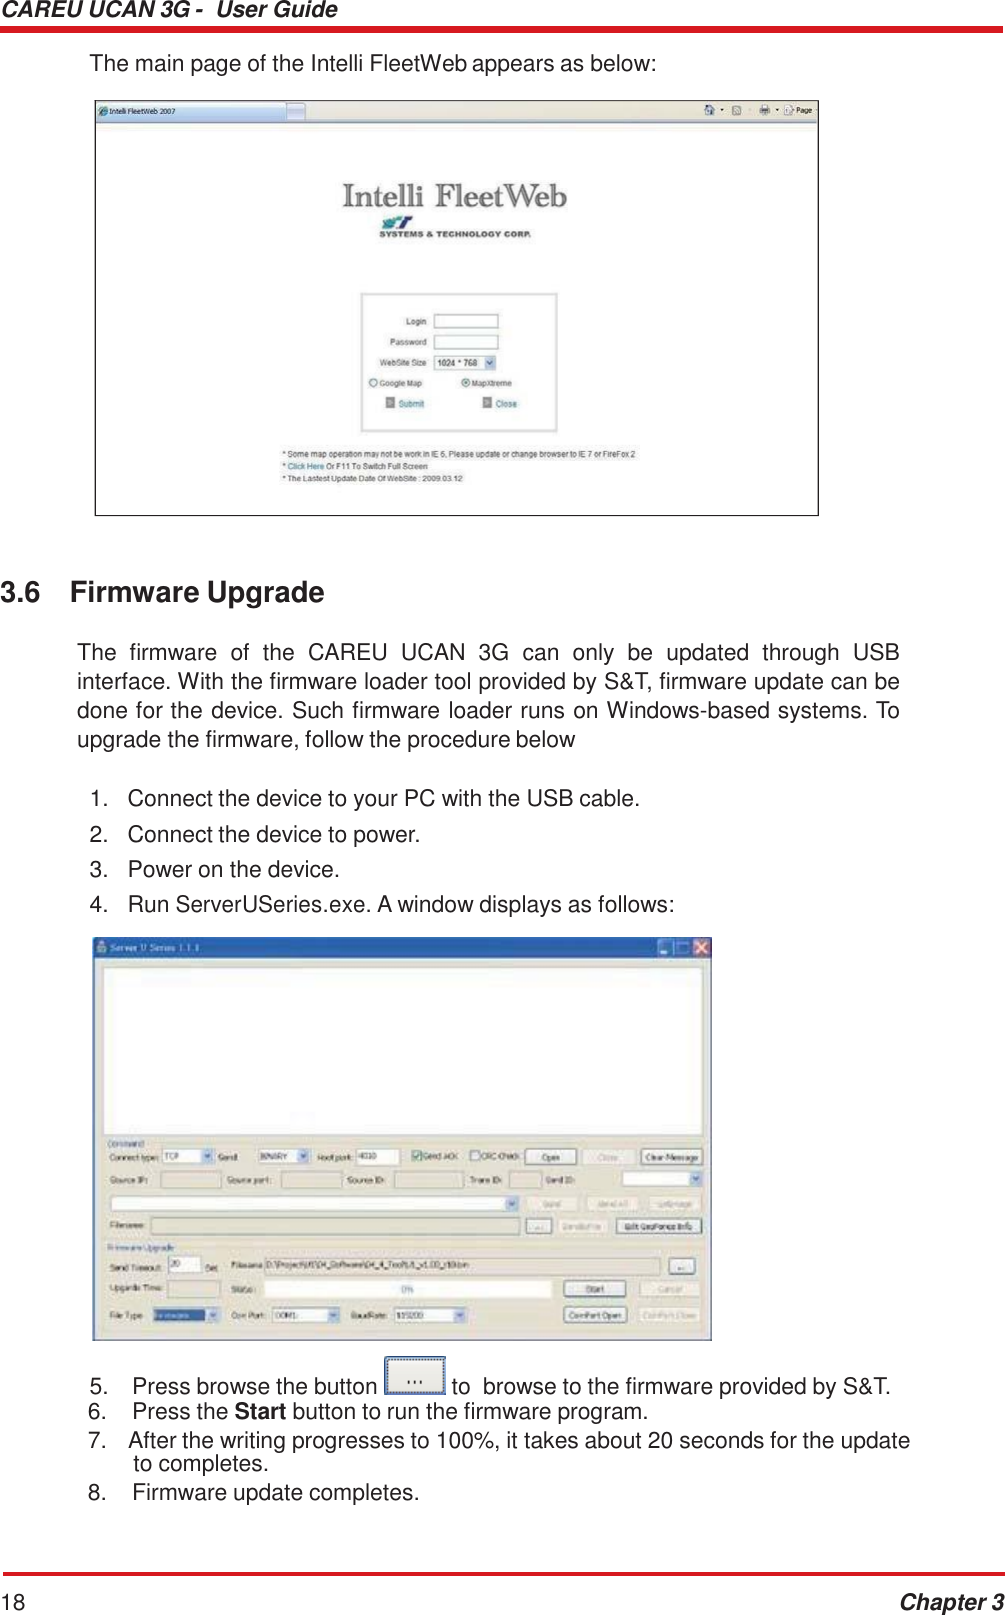 CAREU UCAN 3G -  User Guide 18 Chapter 3    The main page of the Intelli FleetWeb appears as below:                         3.6  Firmware Upgrade  The  firmware  of  the  CAREU  UCAN  3G  can  only  be  updated  through  USB interface. With the firmware loader tool provided by S&amp;T, firmware update can be done for the device. Such firmware loader runs on Windows-based systems. To upgrade the firmware, follow the procedure below  1.   Connect the device to your PC with the USB cable. 2.   Connect the device to power. 3.   Power on the device. 4.   Run ServerUSeries.exe. A window displays as follows:    5.  Press browse the button   to  browse to the firmware provided by S&amp;T. 6.  Press the Start button to run the firmware program. 7.  After the writing progresses to 100%, it takes about 20 seconds for the update to completes. 8.  Firmware update completes. 